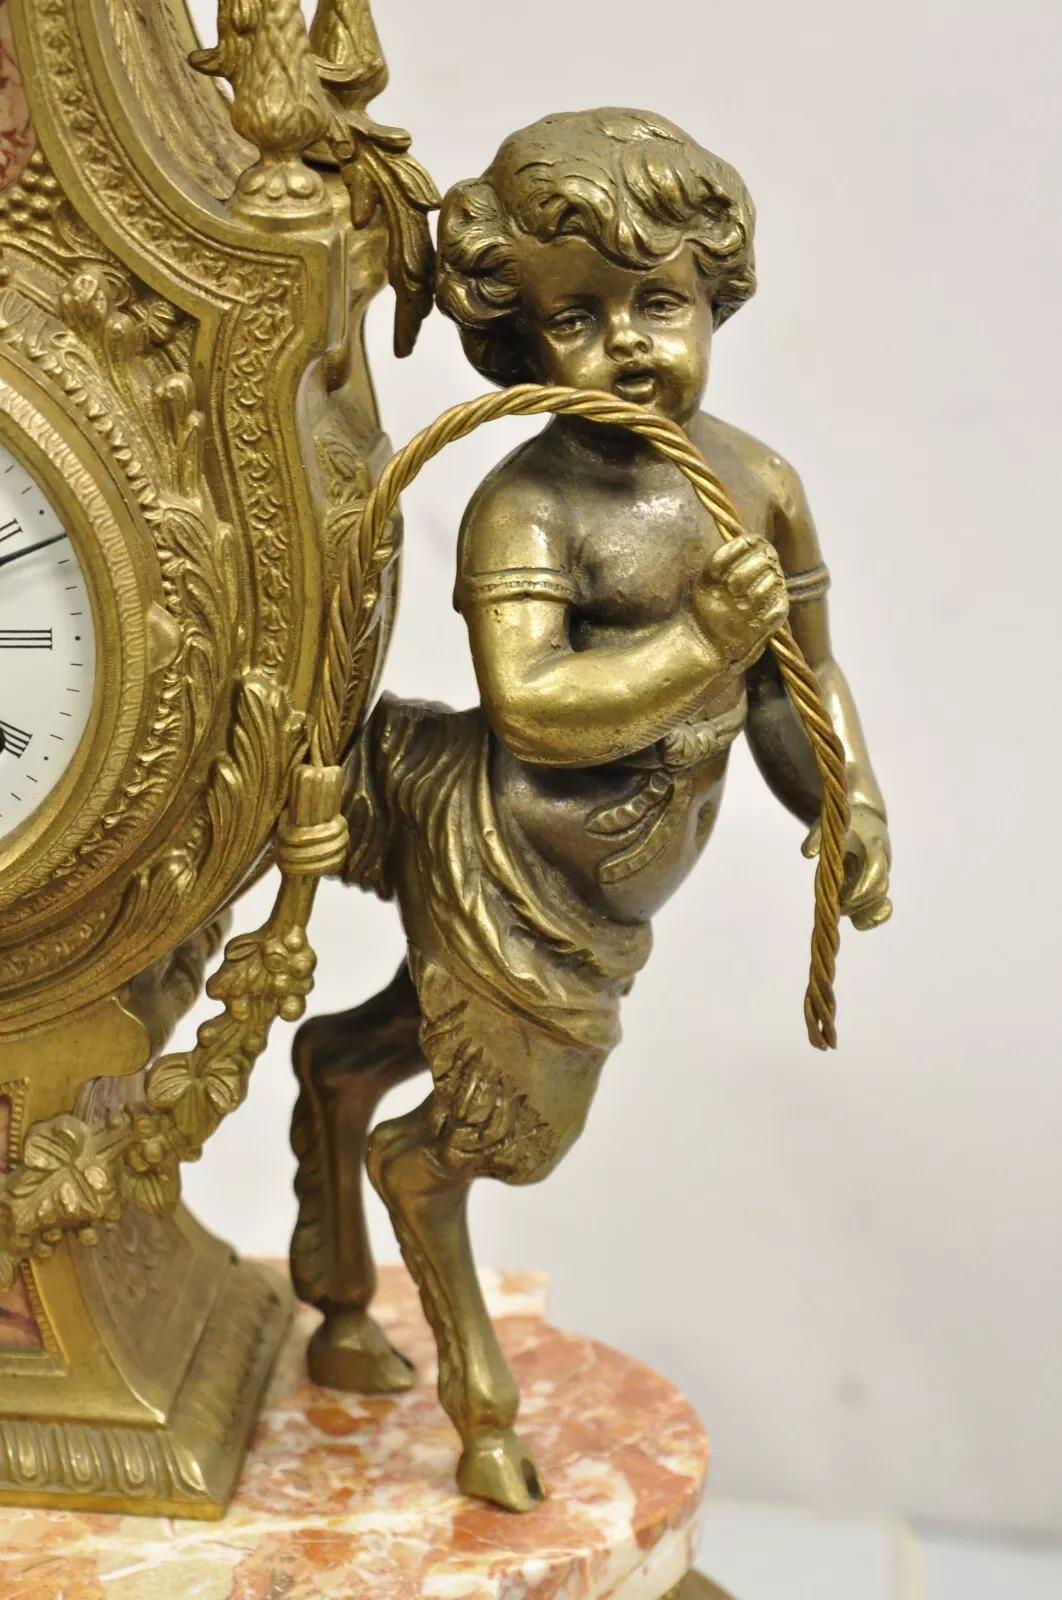 Vintage French Louis XV Style Brevetatto Italy Brass and Marble Figural Cherub Clock. Item features an ornate figural clock with hoof foot cherubs and pink marble accents, German clock movement (has not been tested). Very impressive clock. Circa